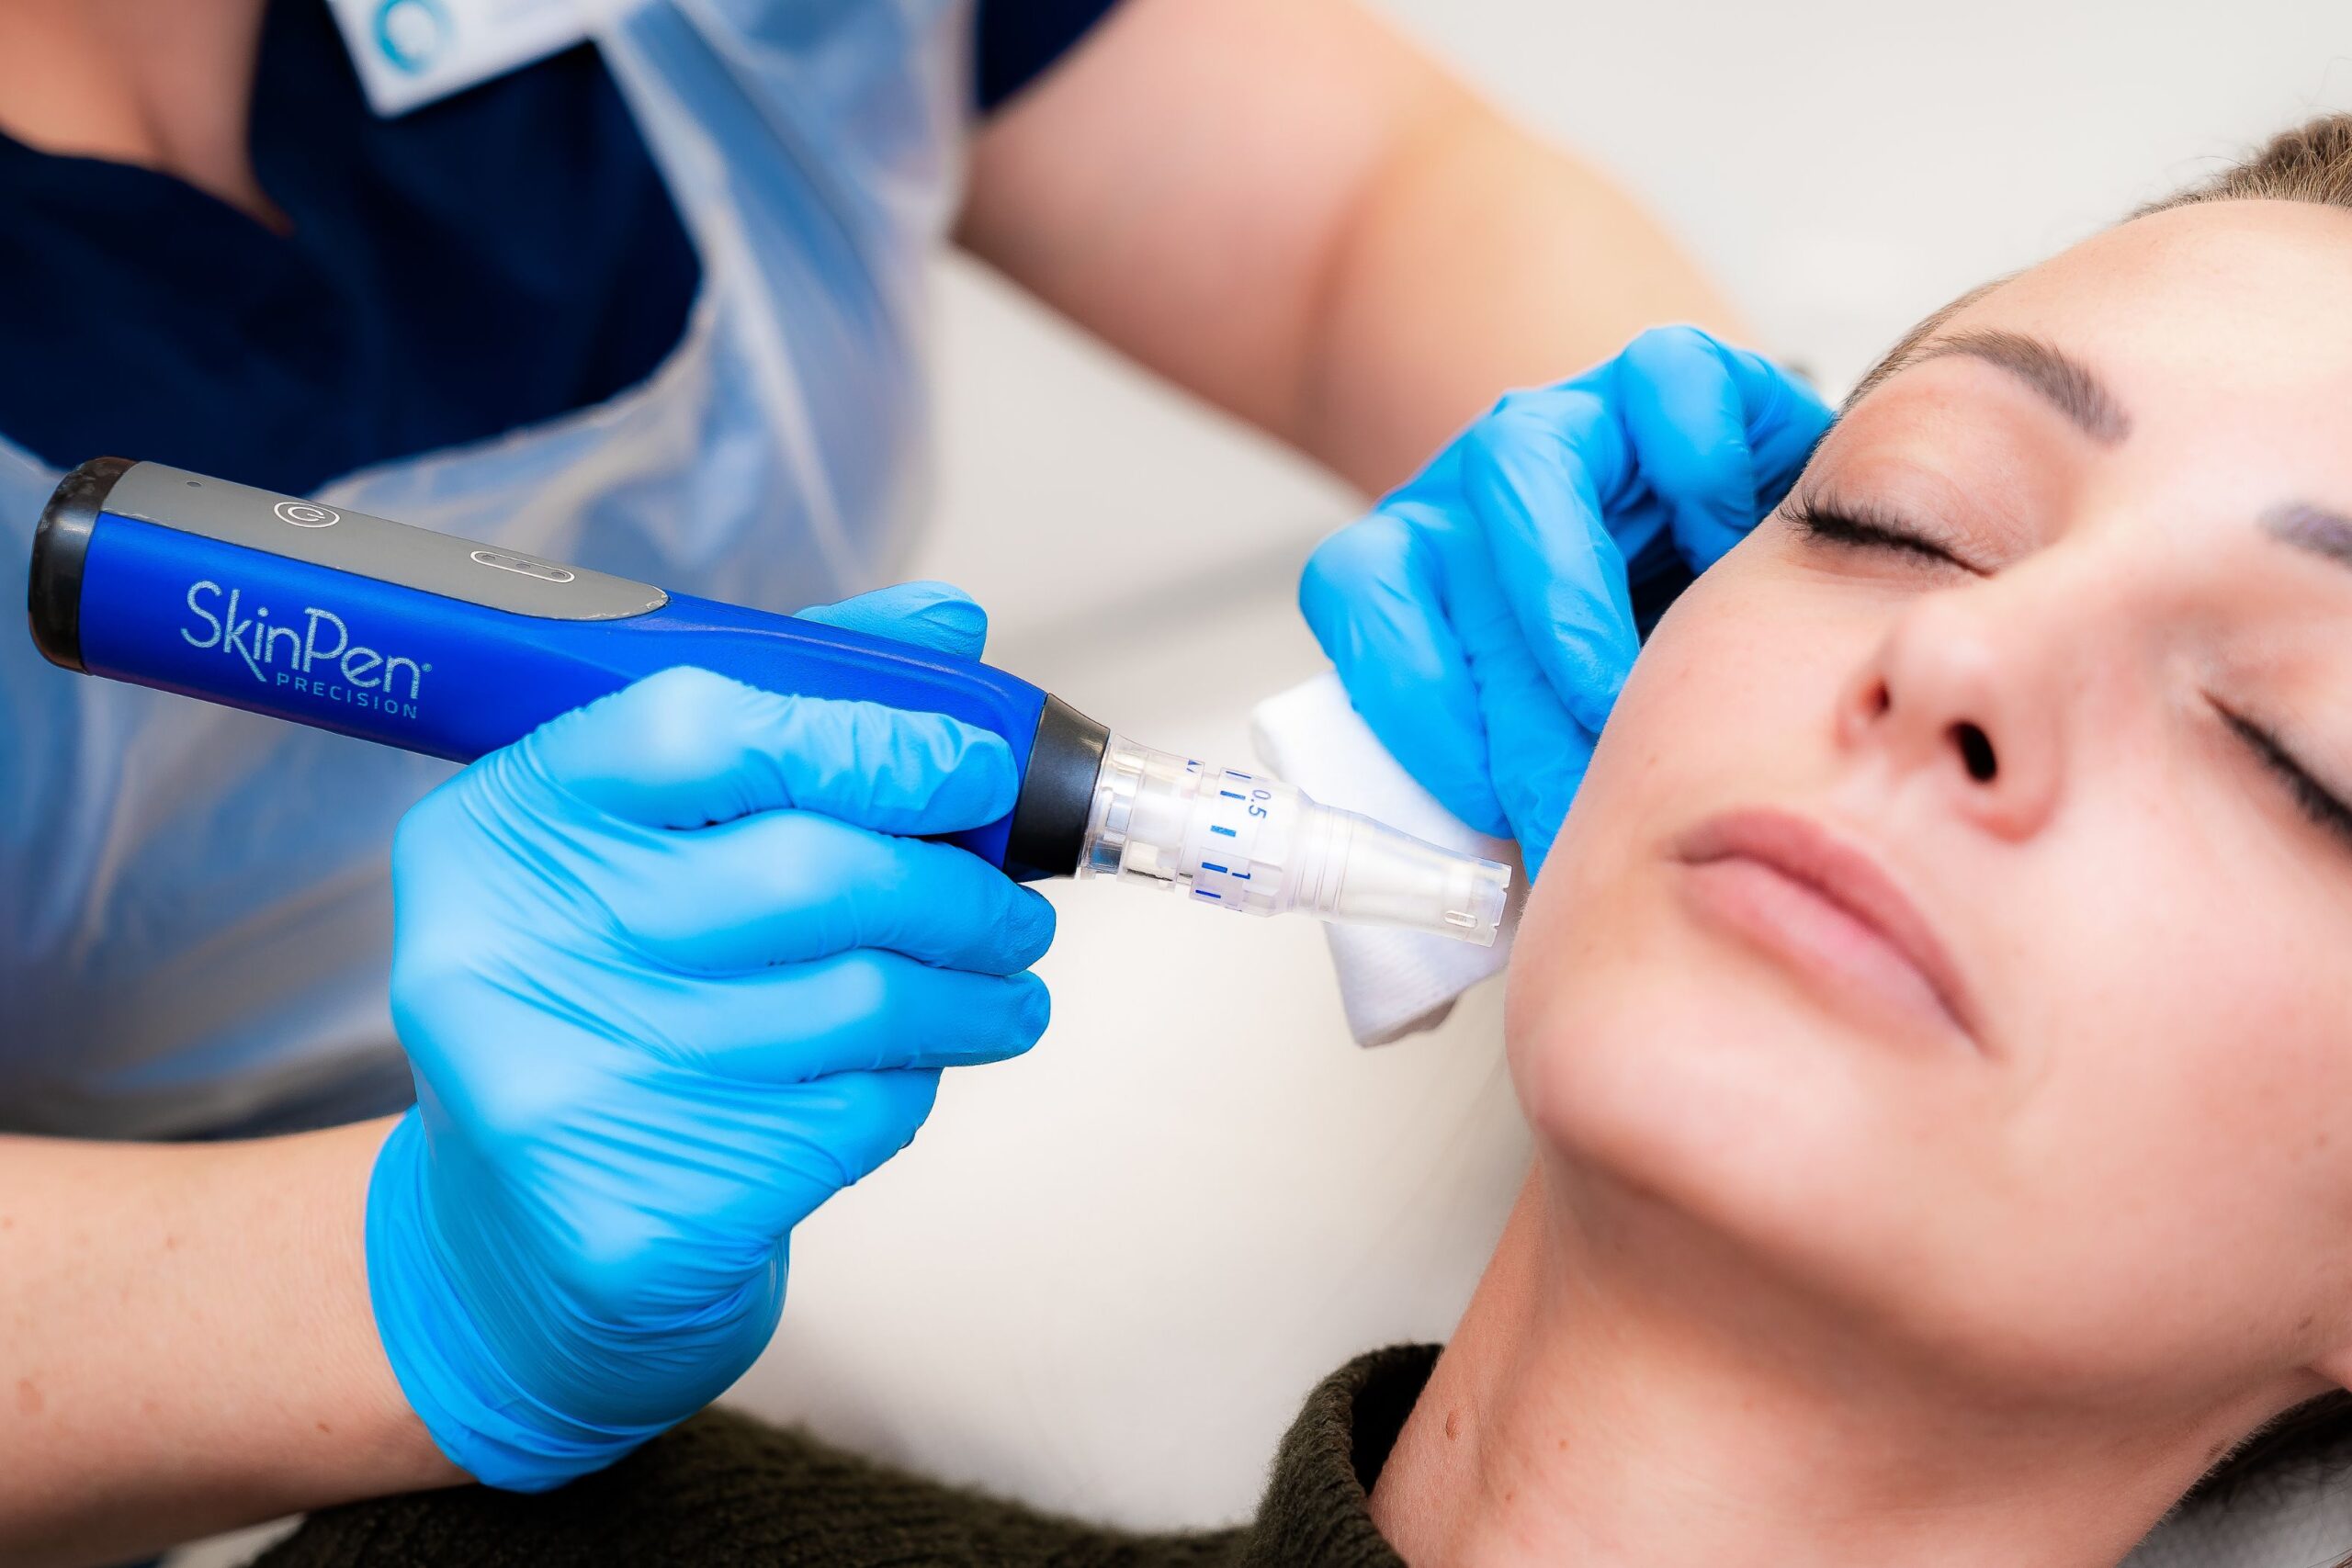 Microneedling for dull skin at Freyja Medical in Wrexham, Nantwich and Cheshire